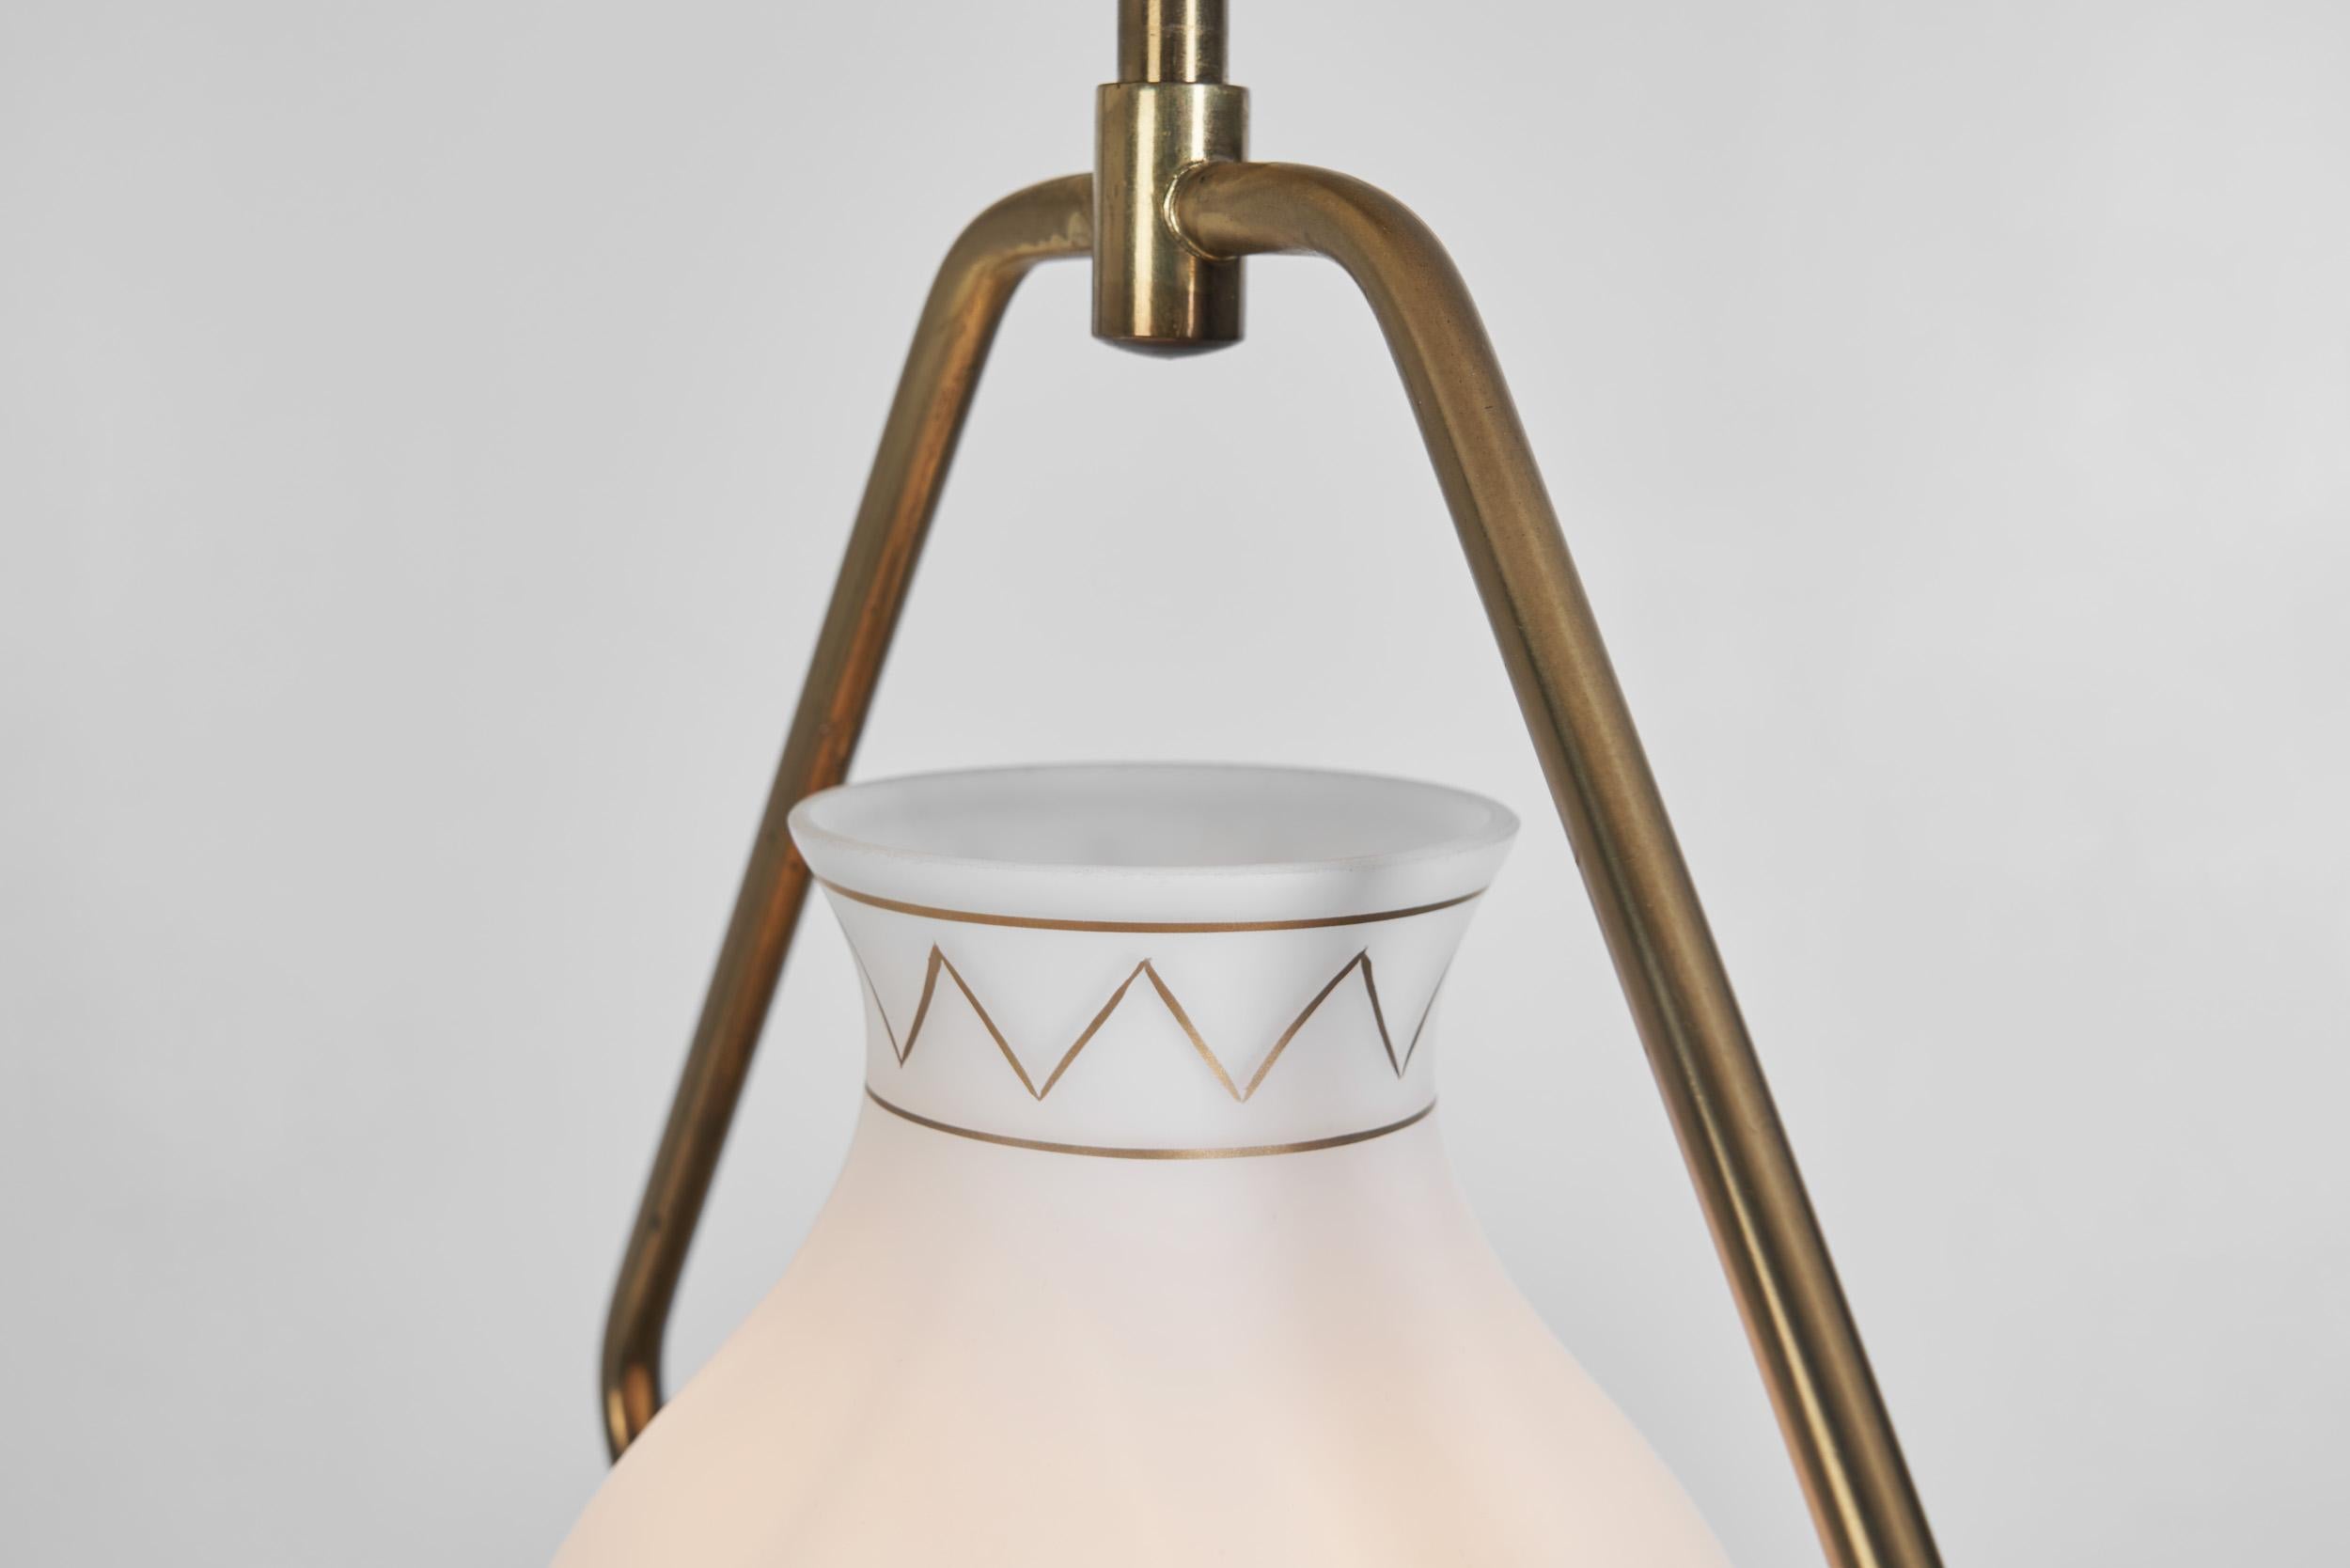 Brass and Opaque Glass Ceiling Lamp, Europe ca 1950s For Sale 8